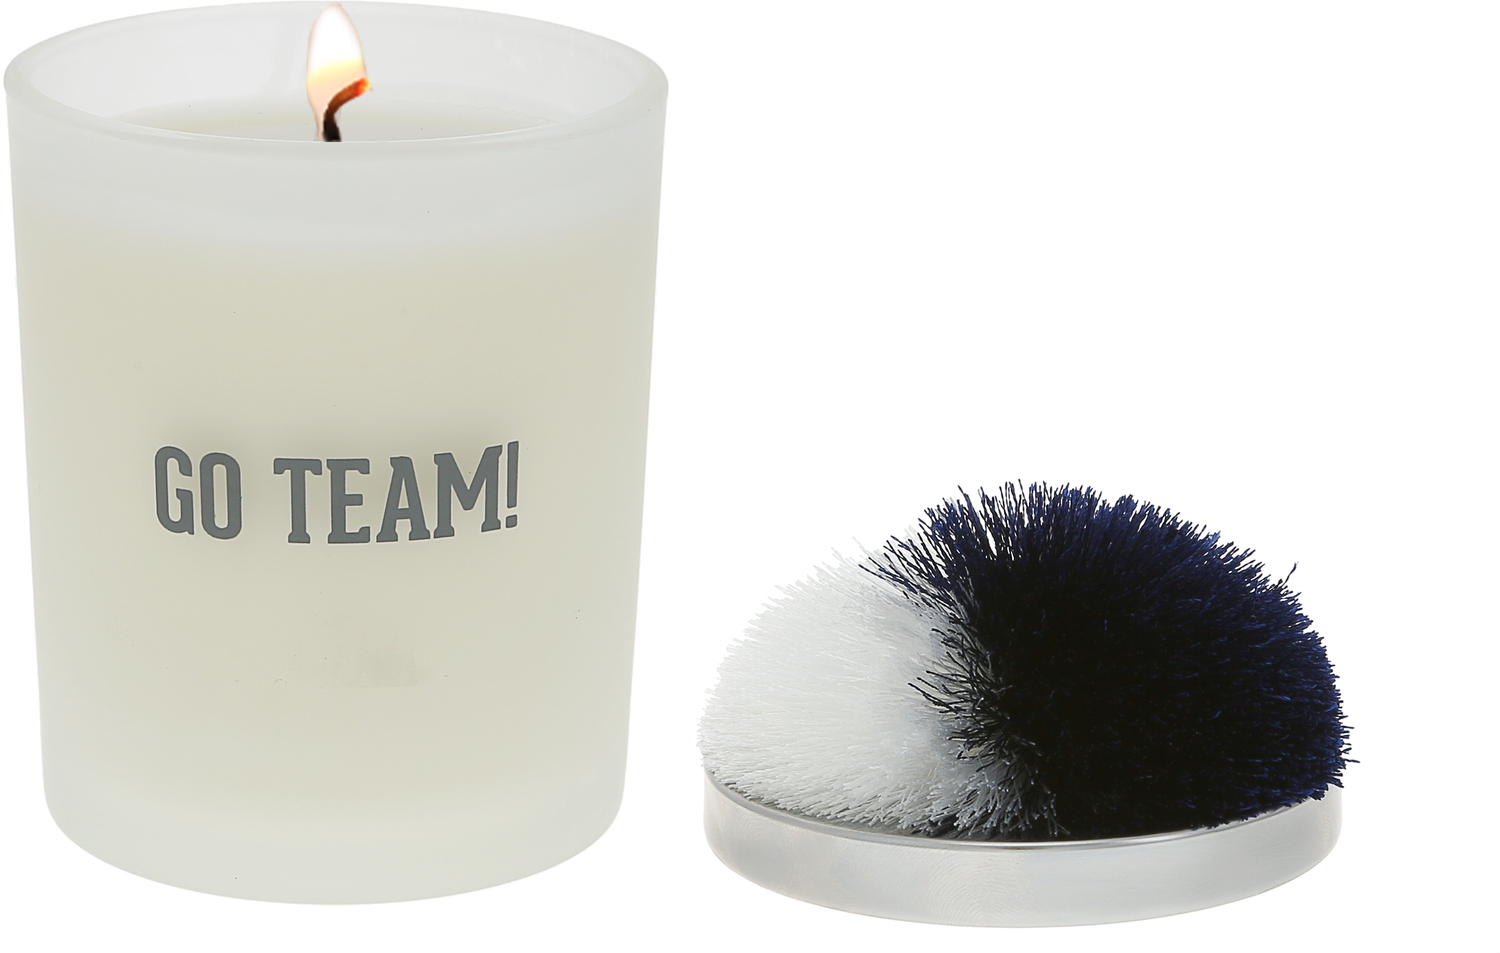 Go Team! - Navy & White by Repre-Scent - Go Team! - Navy & White - 5.5 oz - 100% Soy Wax Candle with Pom Pom Lid
Scent: Tranquility